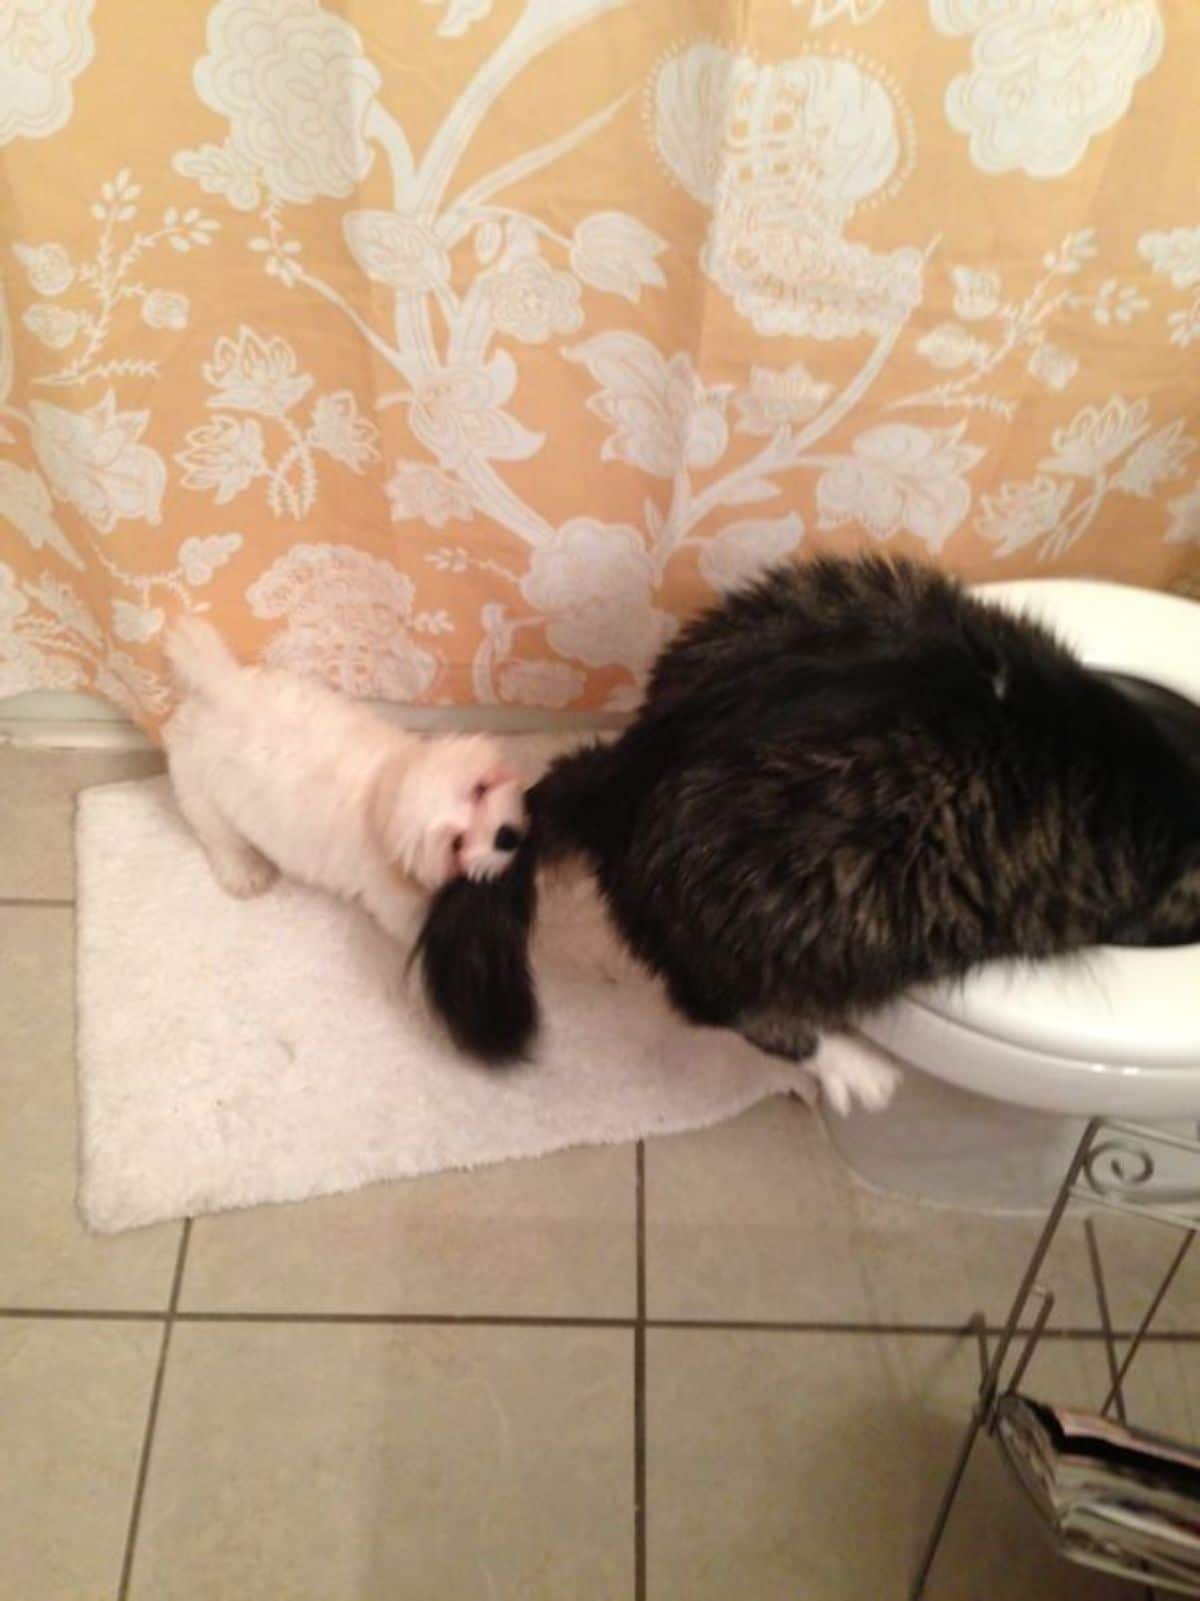 small fluffy white dog holding the tail of a fluffy brown and white tabby cat that has its head inside a toilet